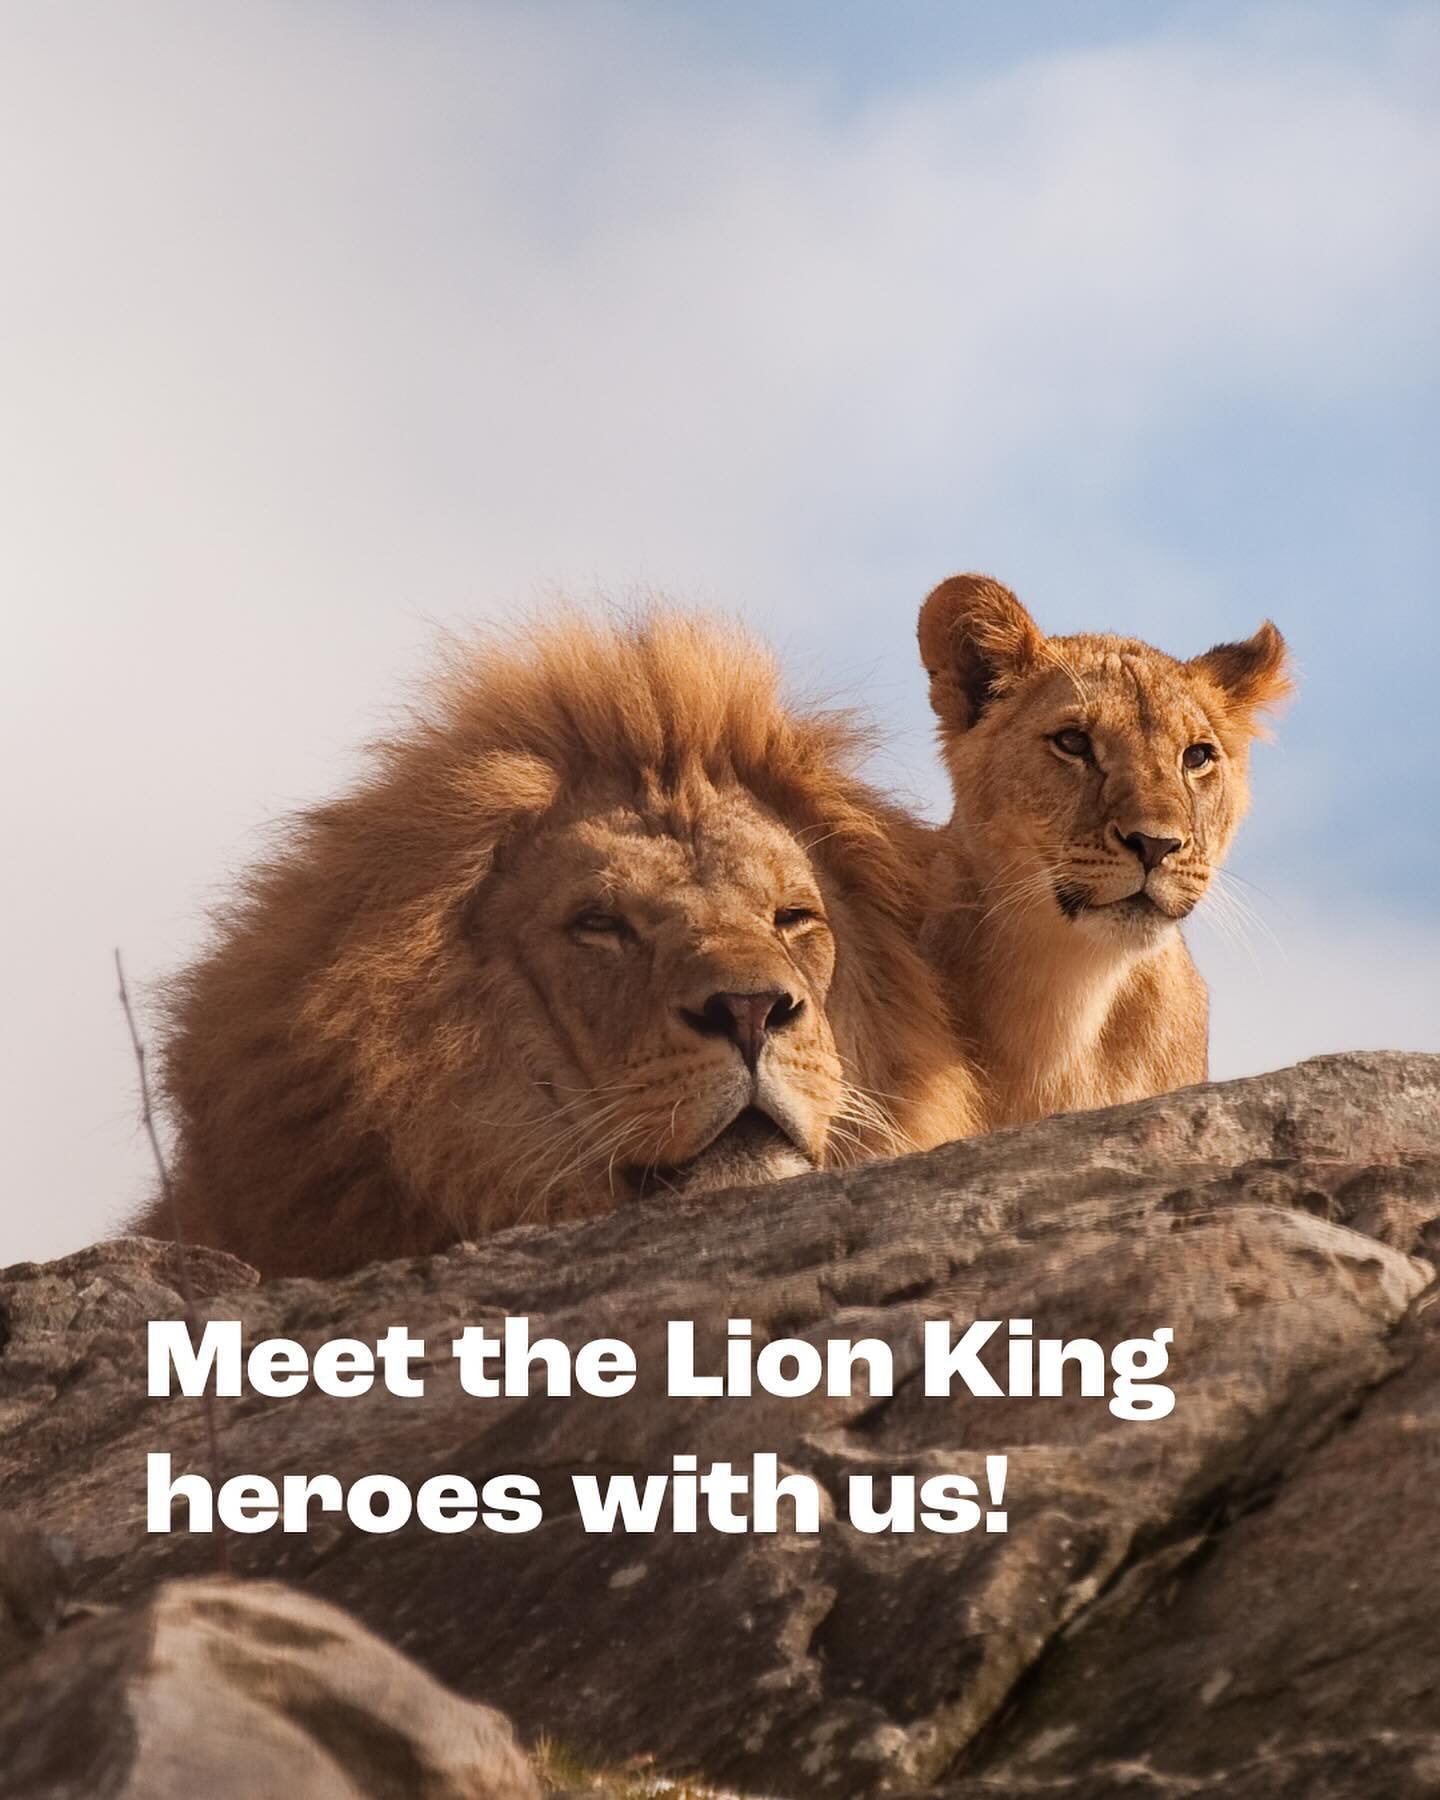 Bring your inner wild child out and experience your own Lion King adventure at Kruger National Park! 🦁

A safari ride that feels straight out of the iconic movie, set amidst the wilderness - create your story of a lifetime along with an exceptional 